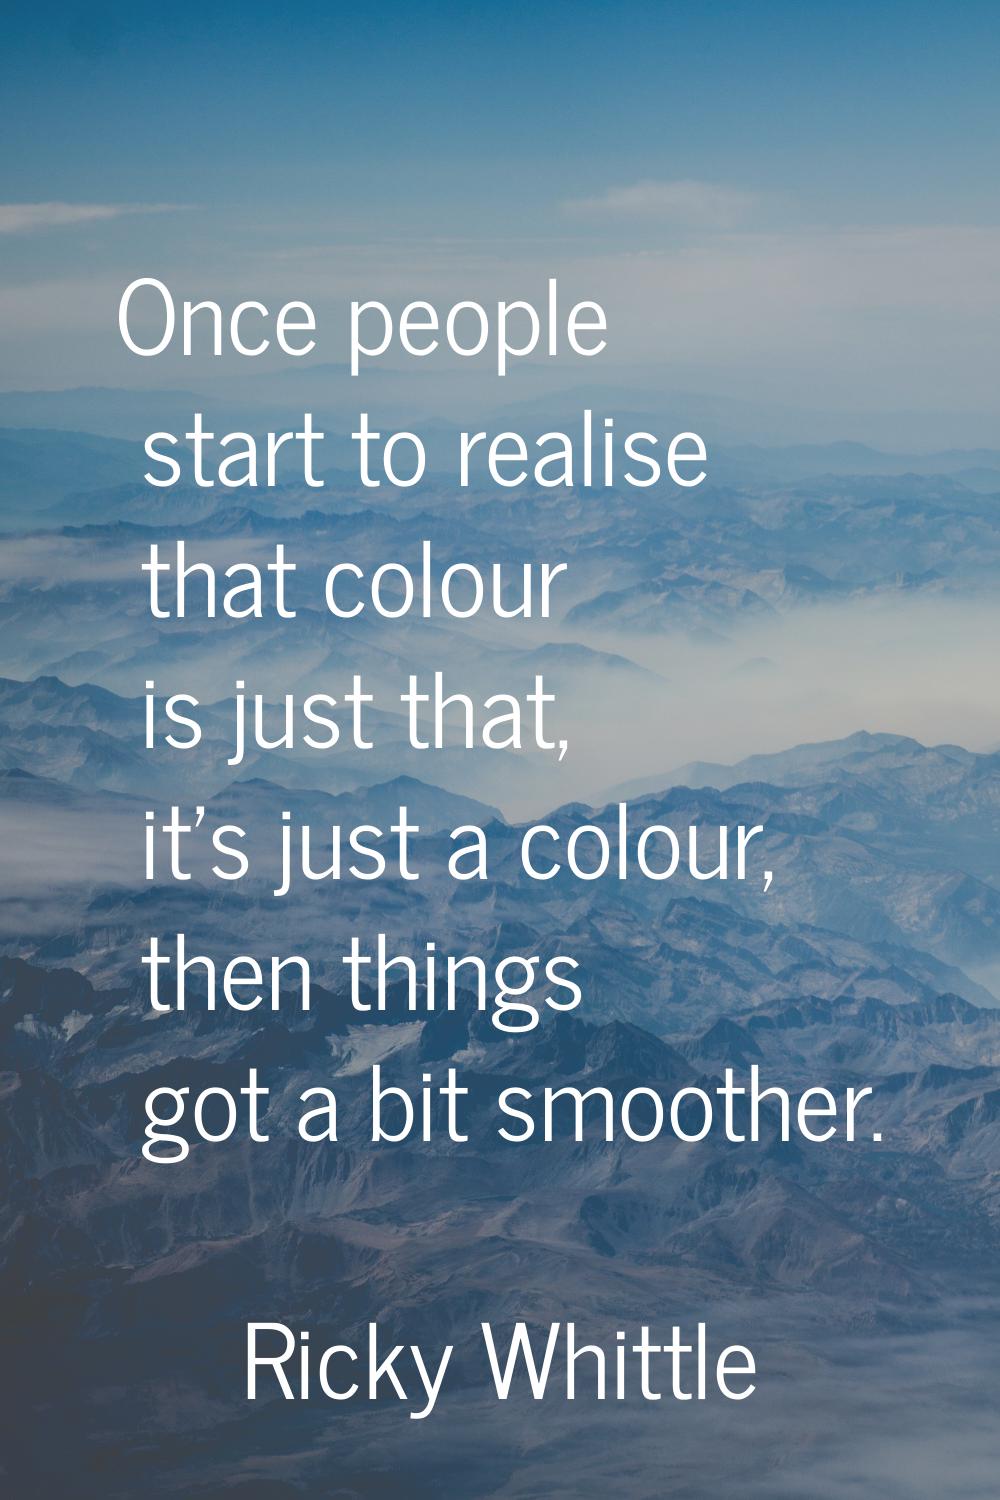 Once people start to realise that colour is just that, it's just a colour, then things got a bit sm